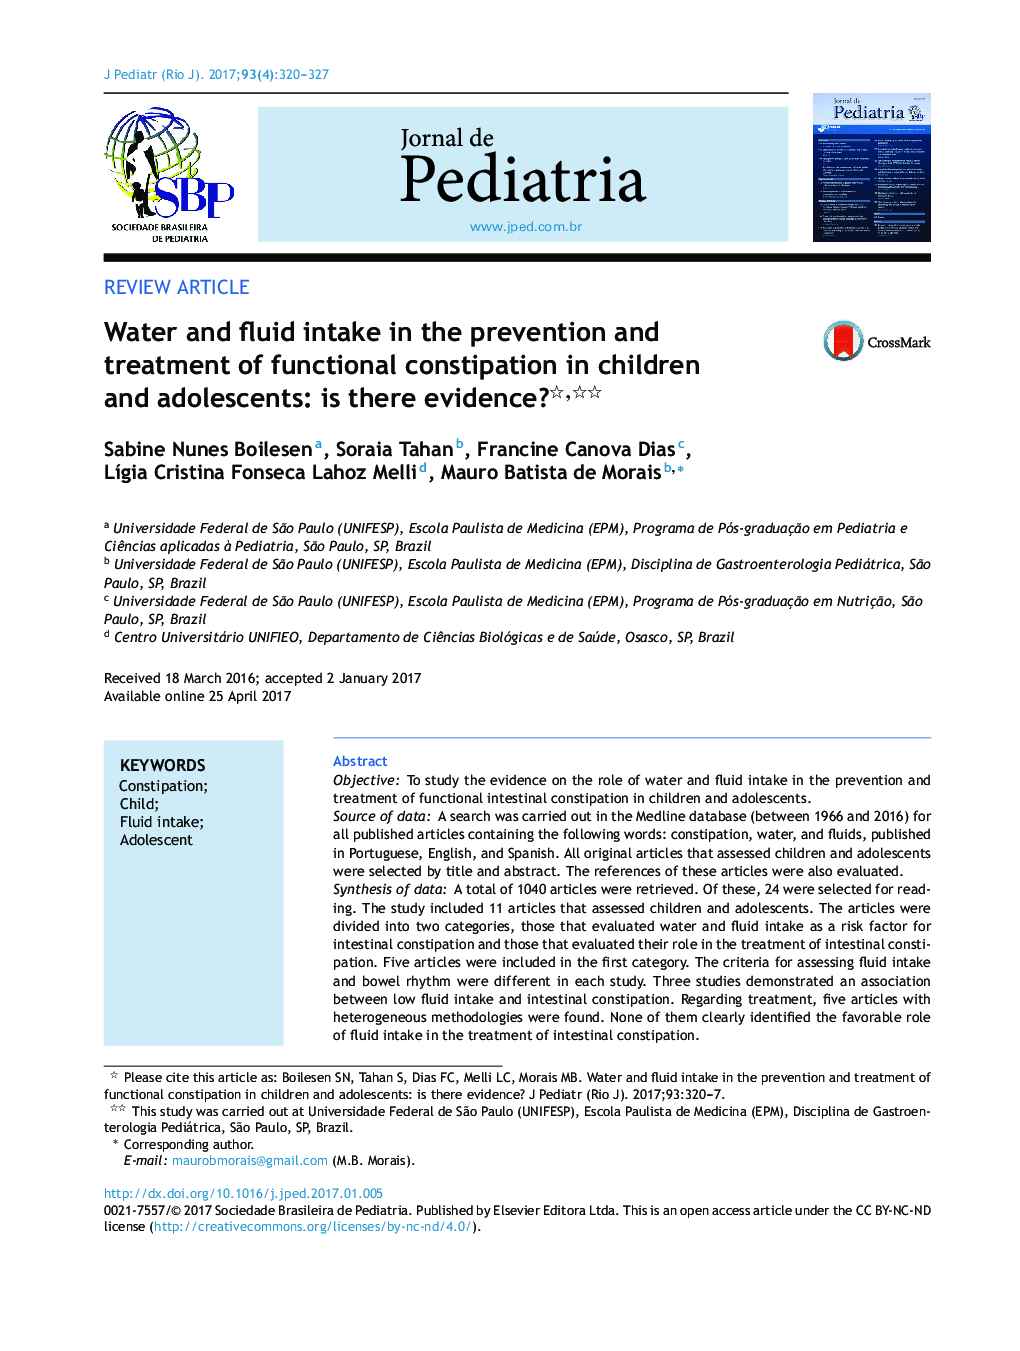 Water and fluid intake in the prevention and treatment of functional constipation in children and adolescents: is there evidence?